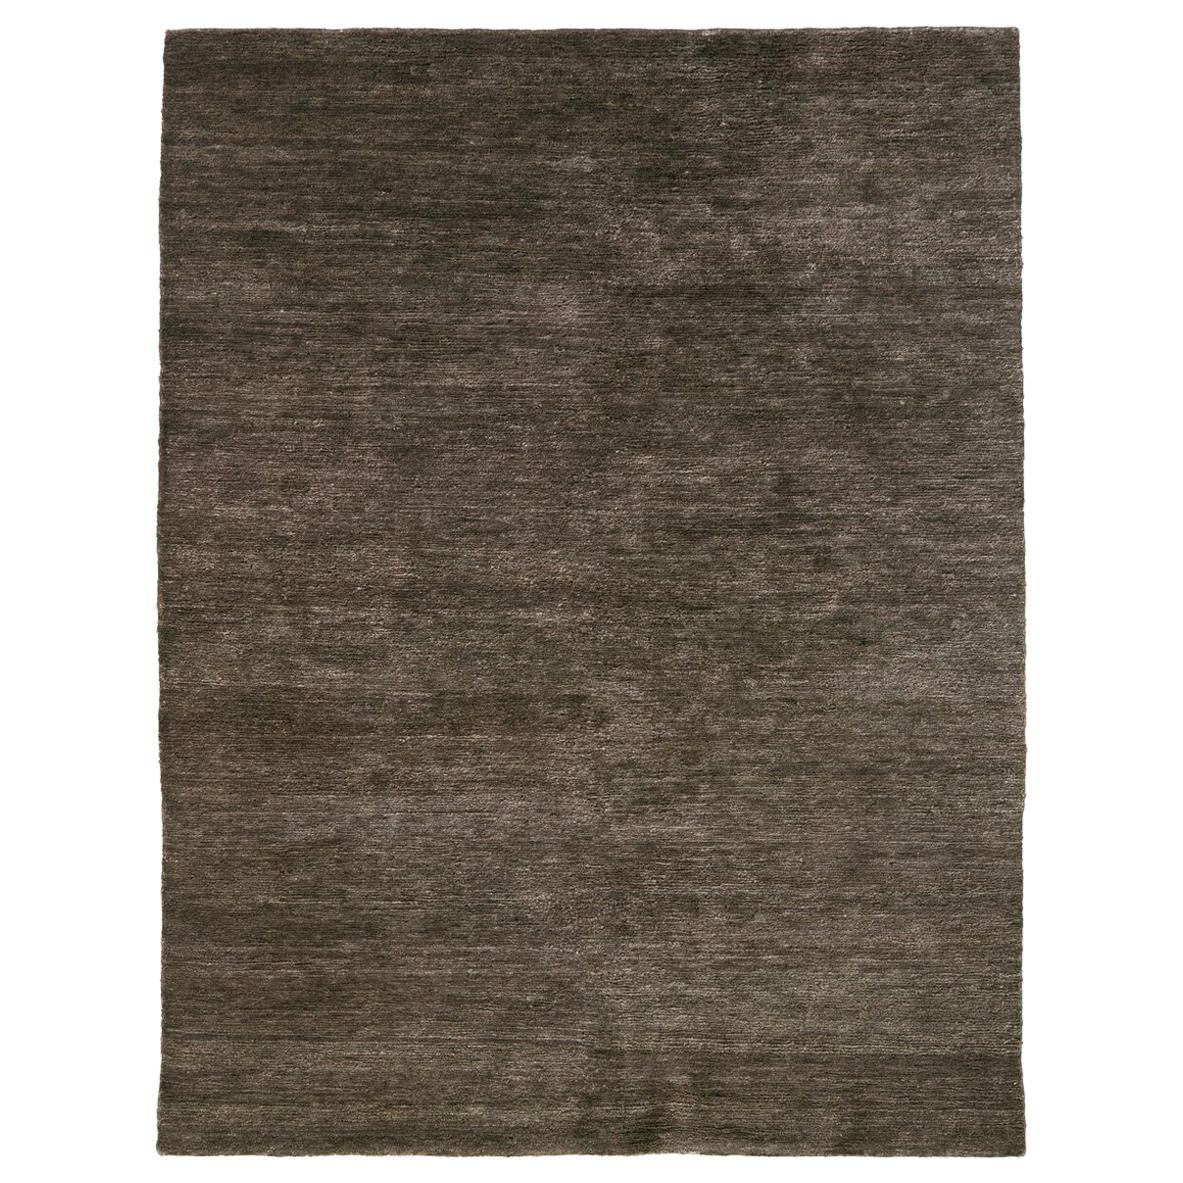 Noche Brown Hand Knotted Jute Rug by Nani Marquina & Ariadna Miquel, Large